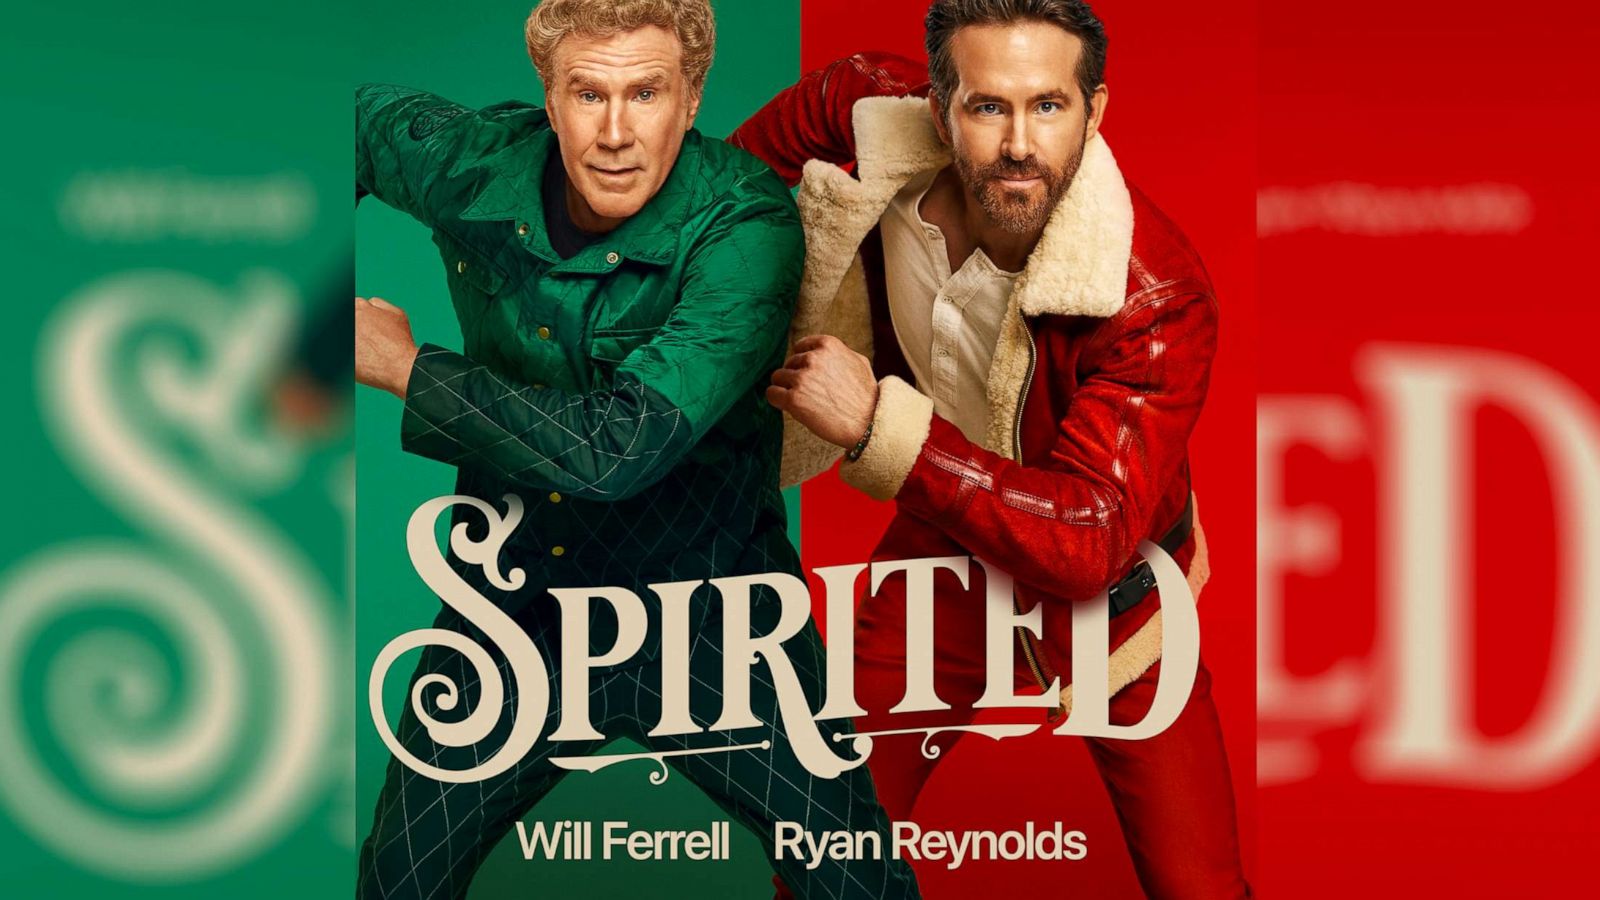 Watch new trailer for holiday comedy 'Spirited,' starring Will Ferrell and  Ryan Reynolds - Good Morning America